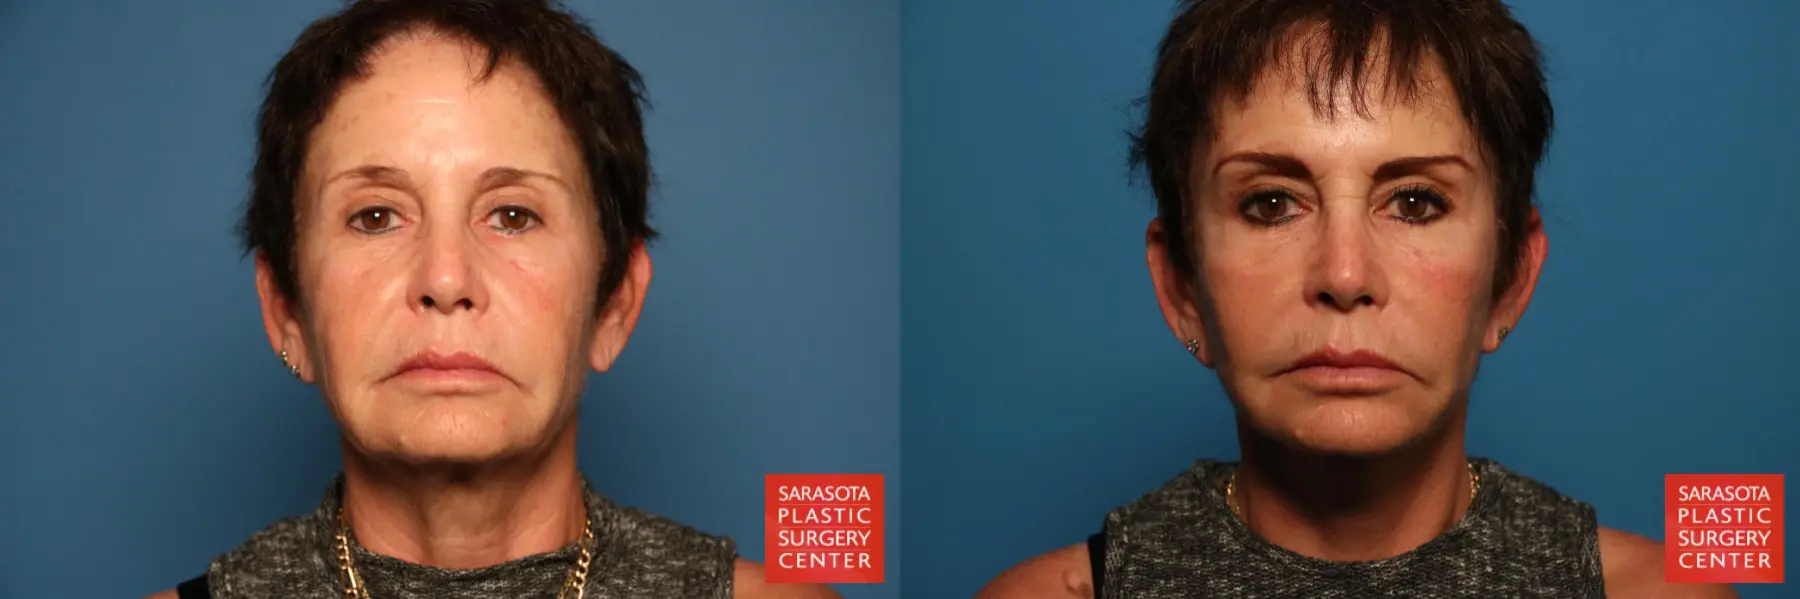 Facelift & Neck Lift: Patient 13 - Before and After  